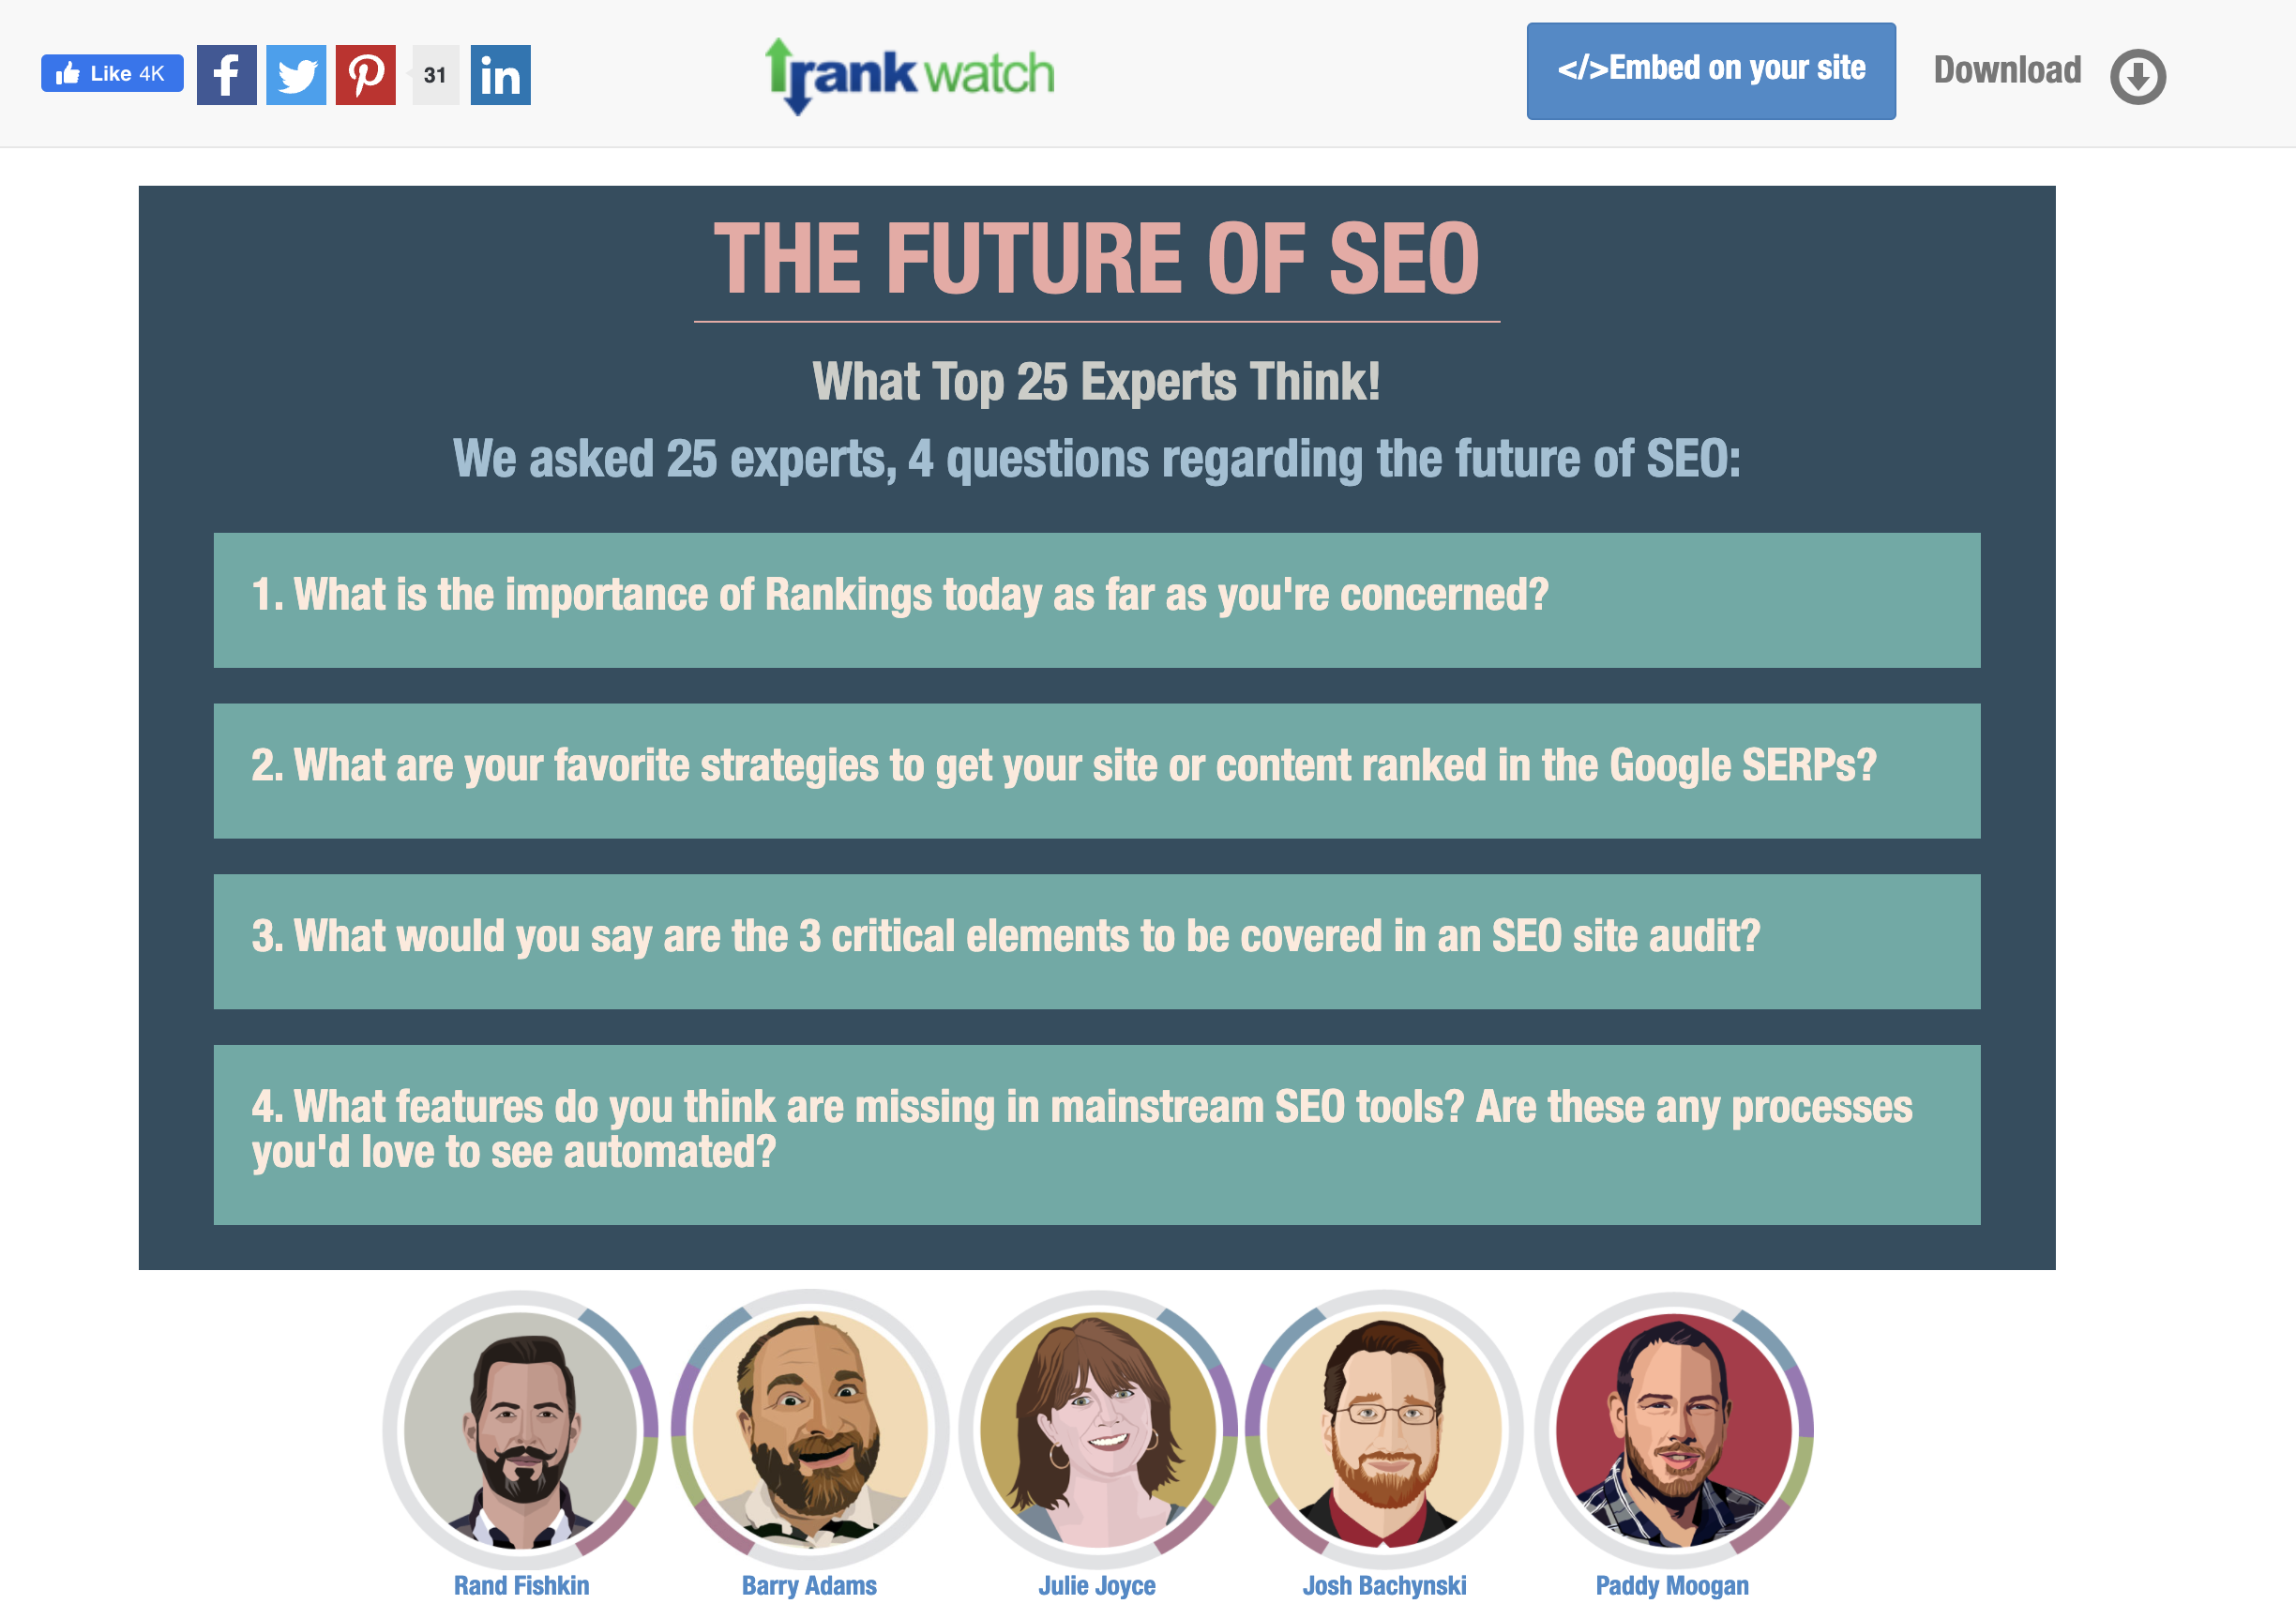 rank watch uses an influencer round-up post to gain links
